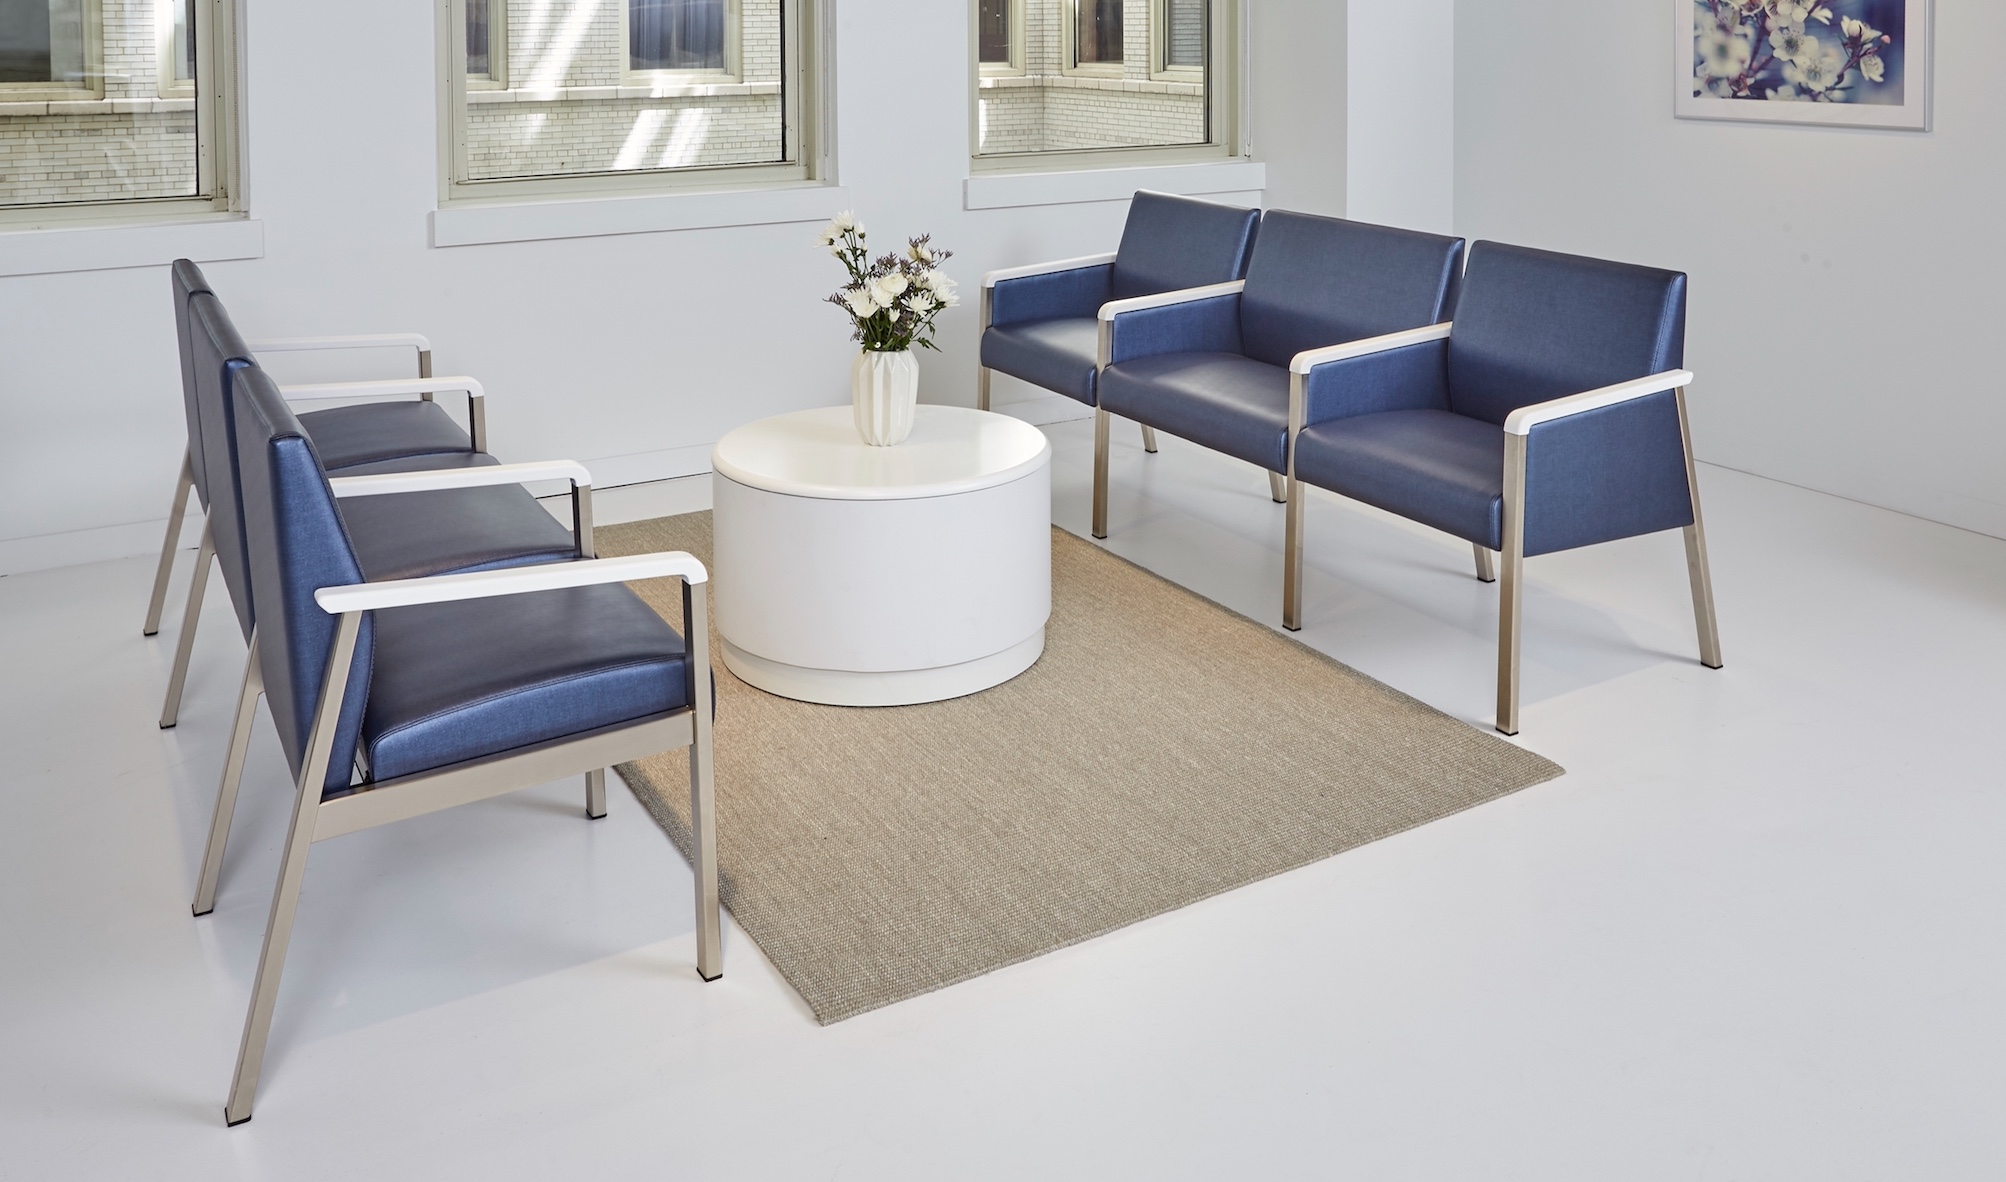 Six Krug Faeron healthcare armchairs in blue vinyl upholstery with metal frame